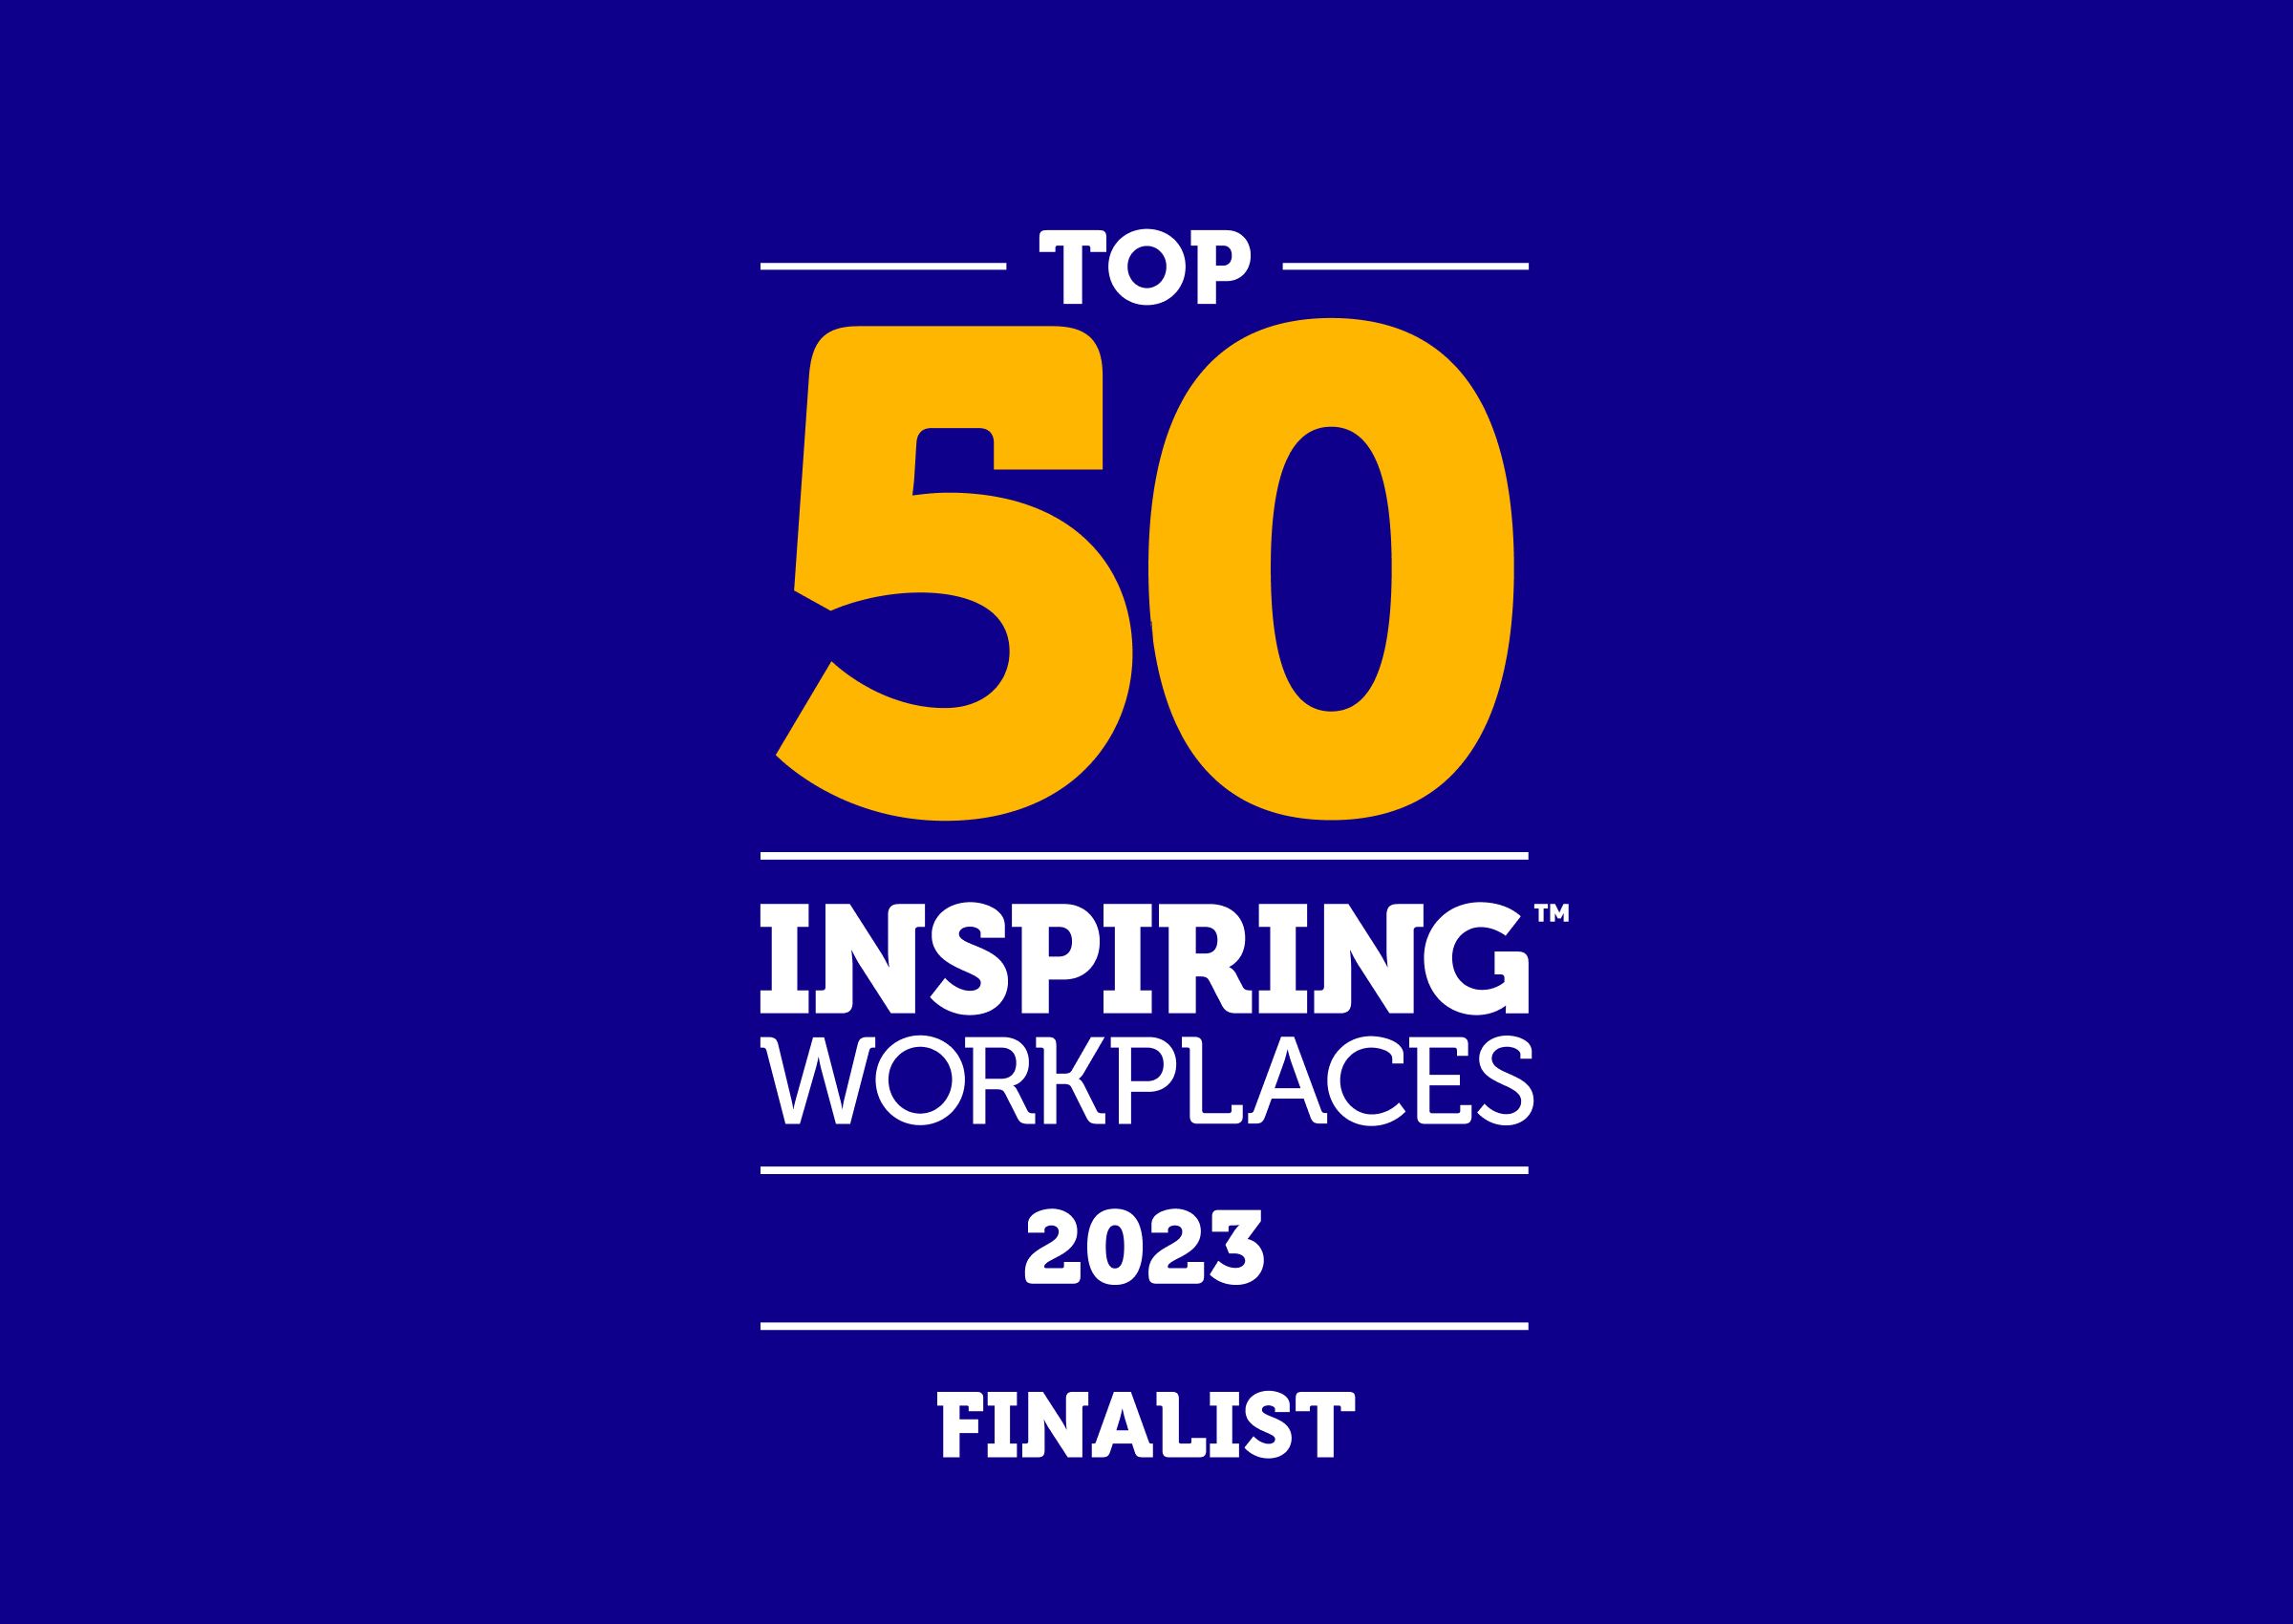 JR&CO RECOGNISED AS A TOP 50 INSPIRING WORKPLACE